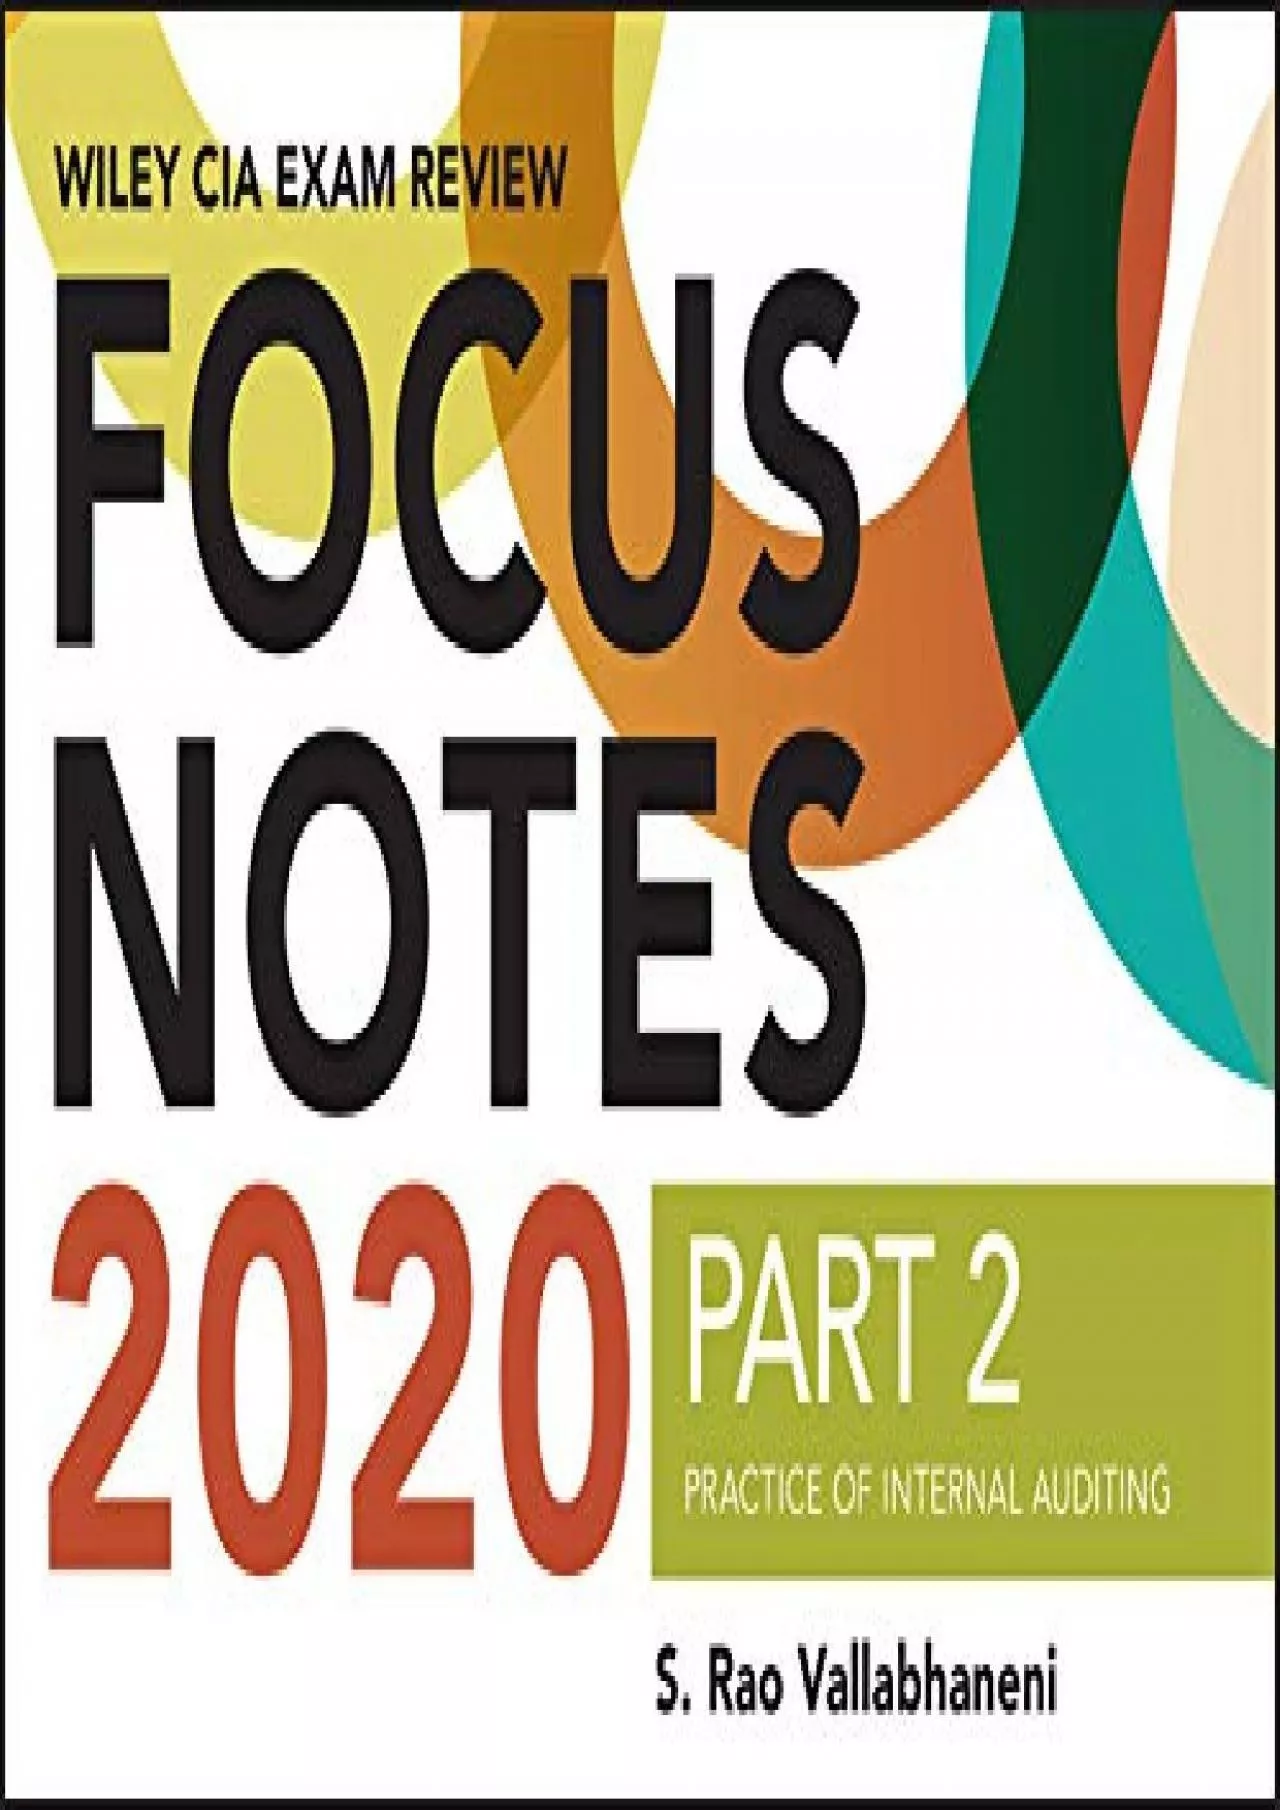 (BOOK)-Wiley CIA Exam Review 2020 Focus Notes, Part 2: Practice of Internal Auditing